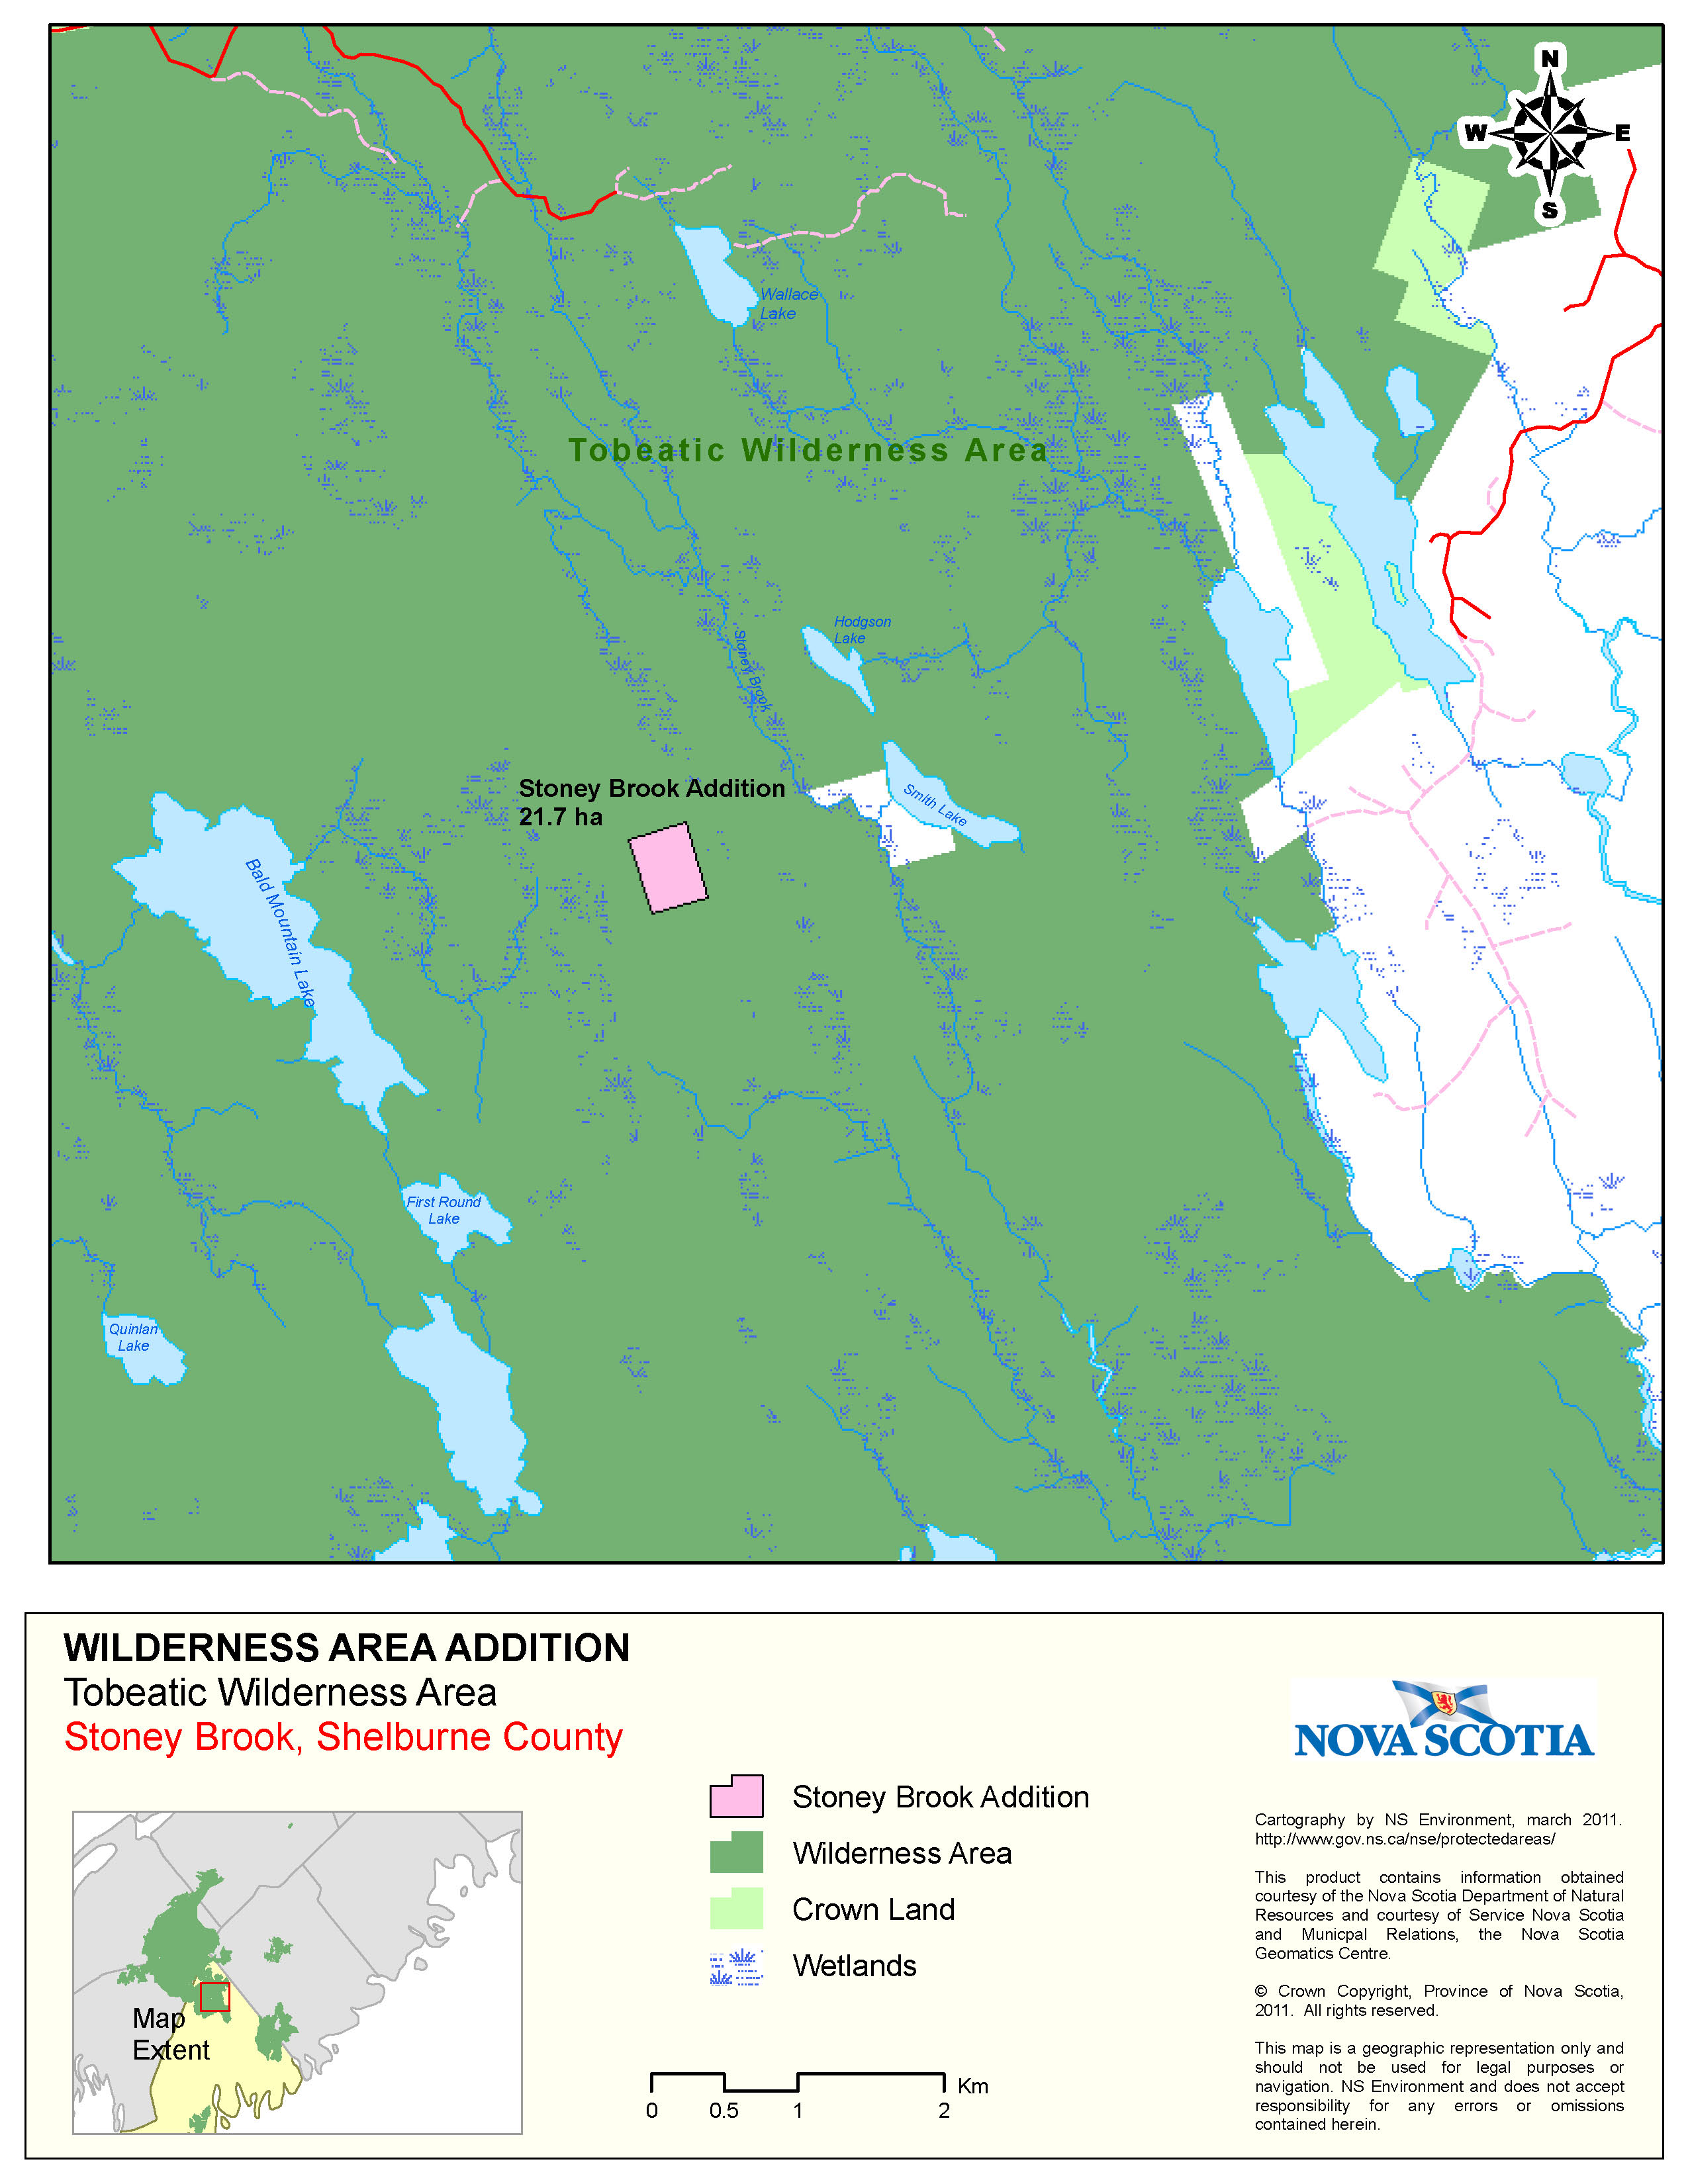 Approximate Boundaries of Crown Land at Stoney Brook, Shelburne County